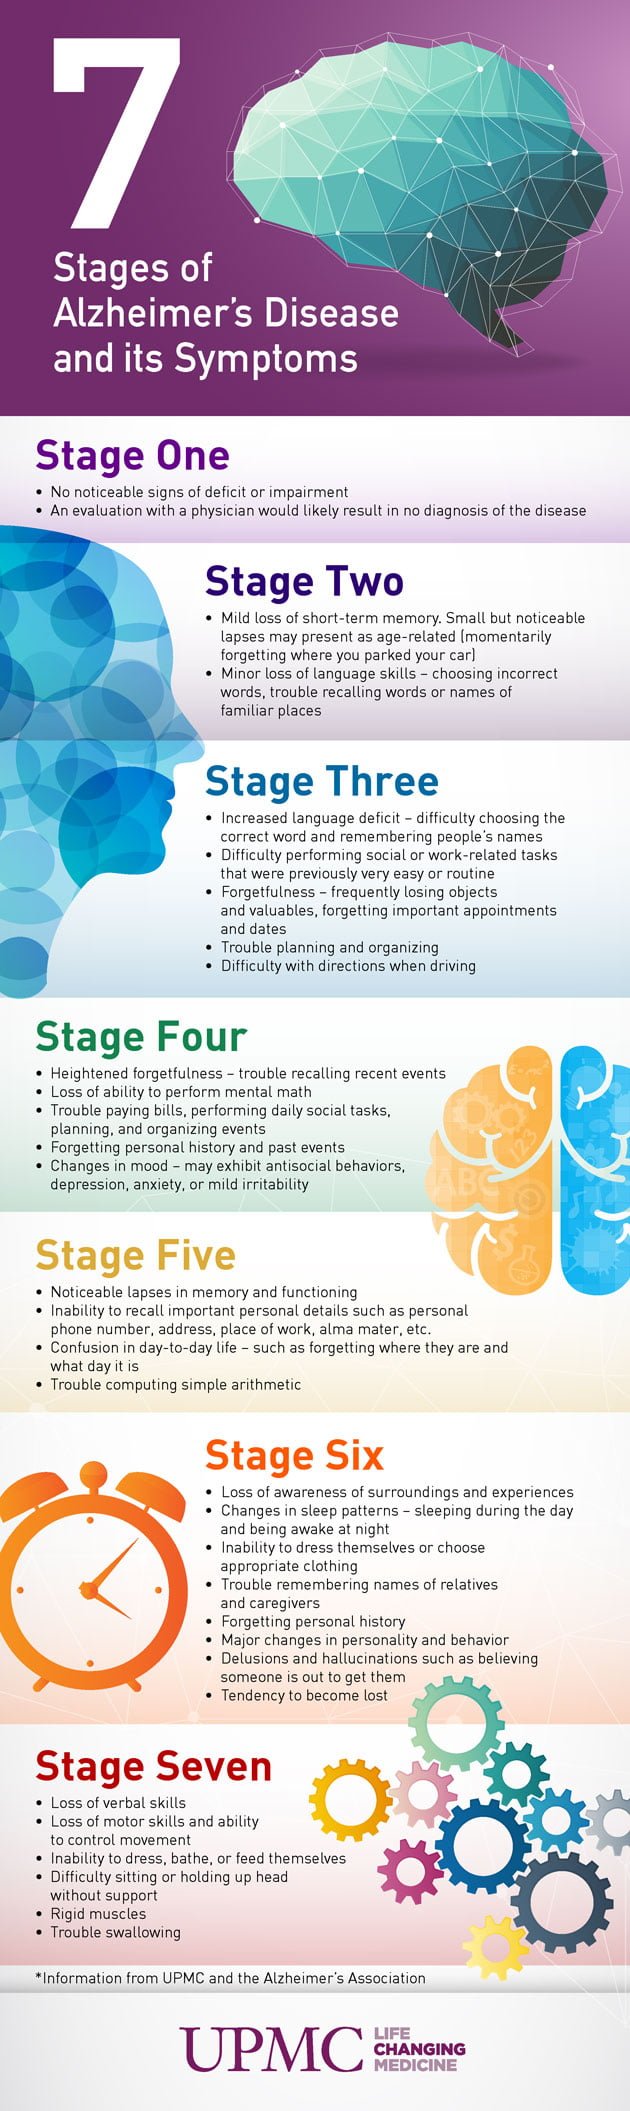 7 Stages of Alzheimers Disease Infographic